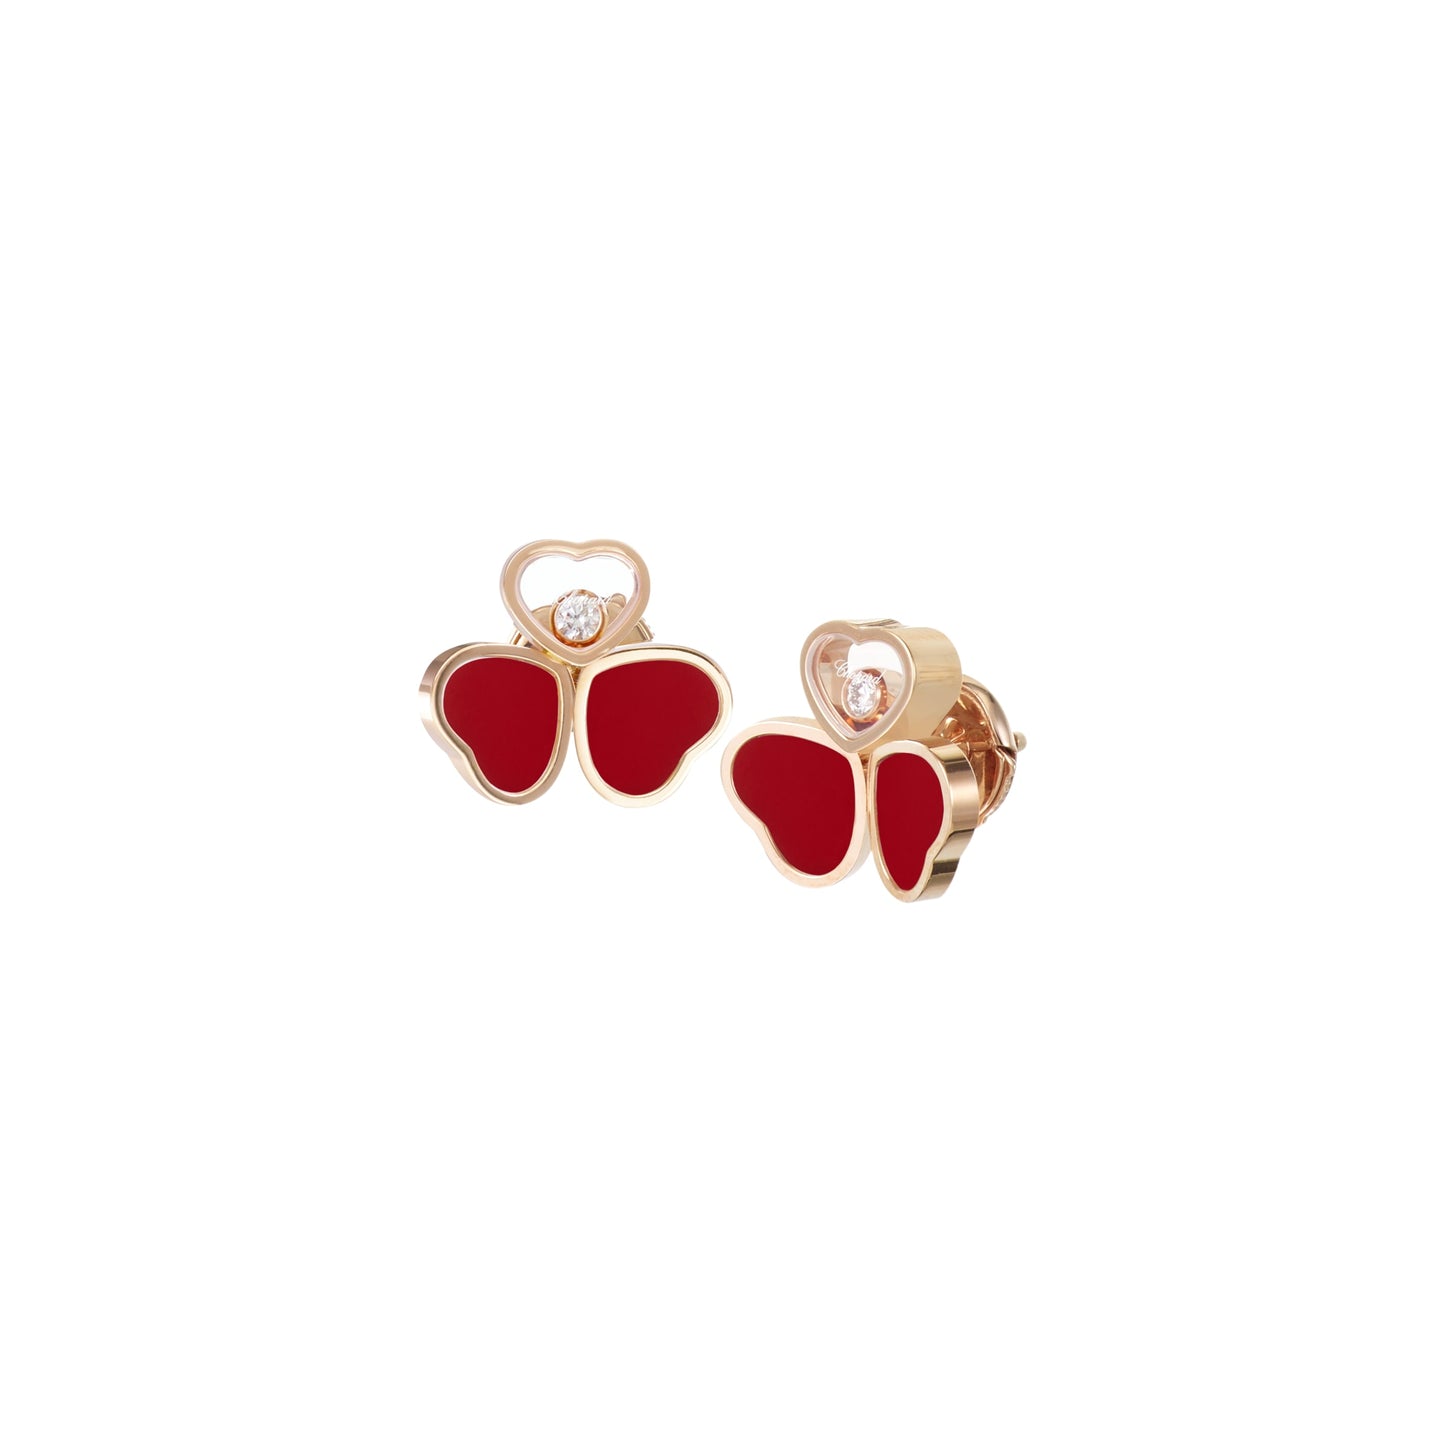 HAPPY HEARTS WINGS EARRINGS, ETHICAL ROSE GOLD, DIAMONDS, RED STONE 83A083-5801